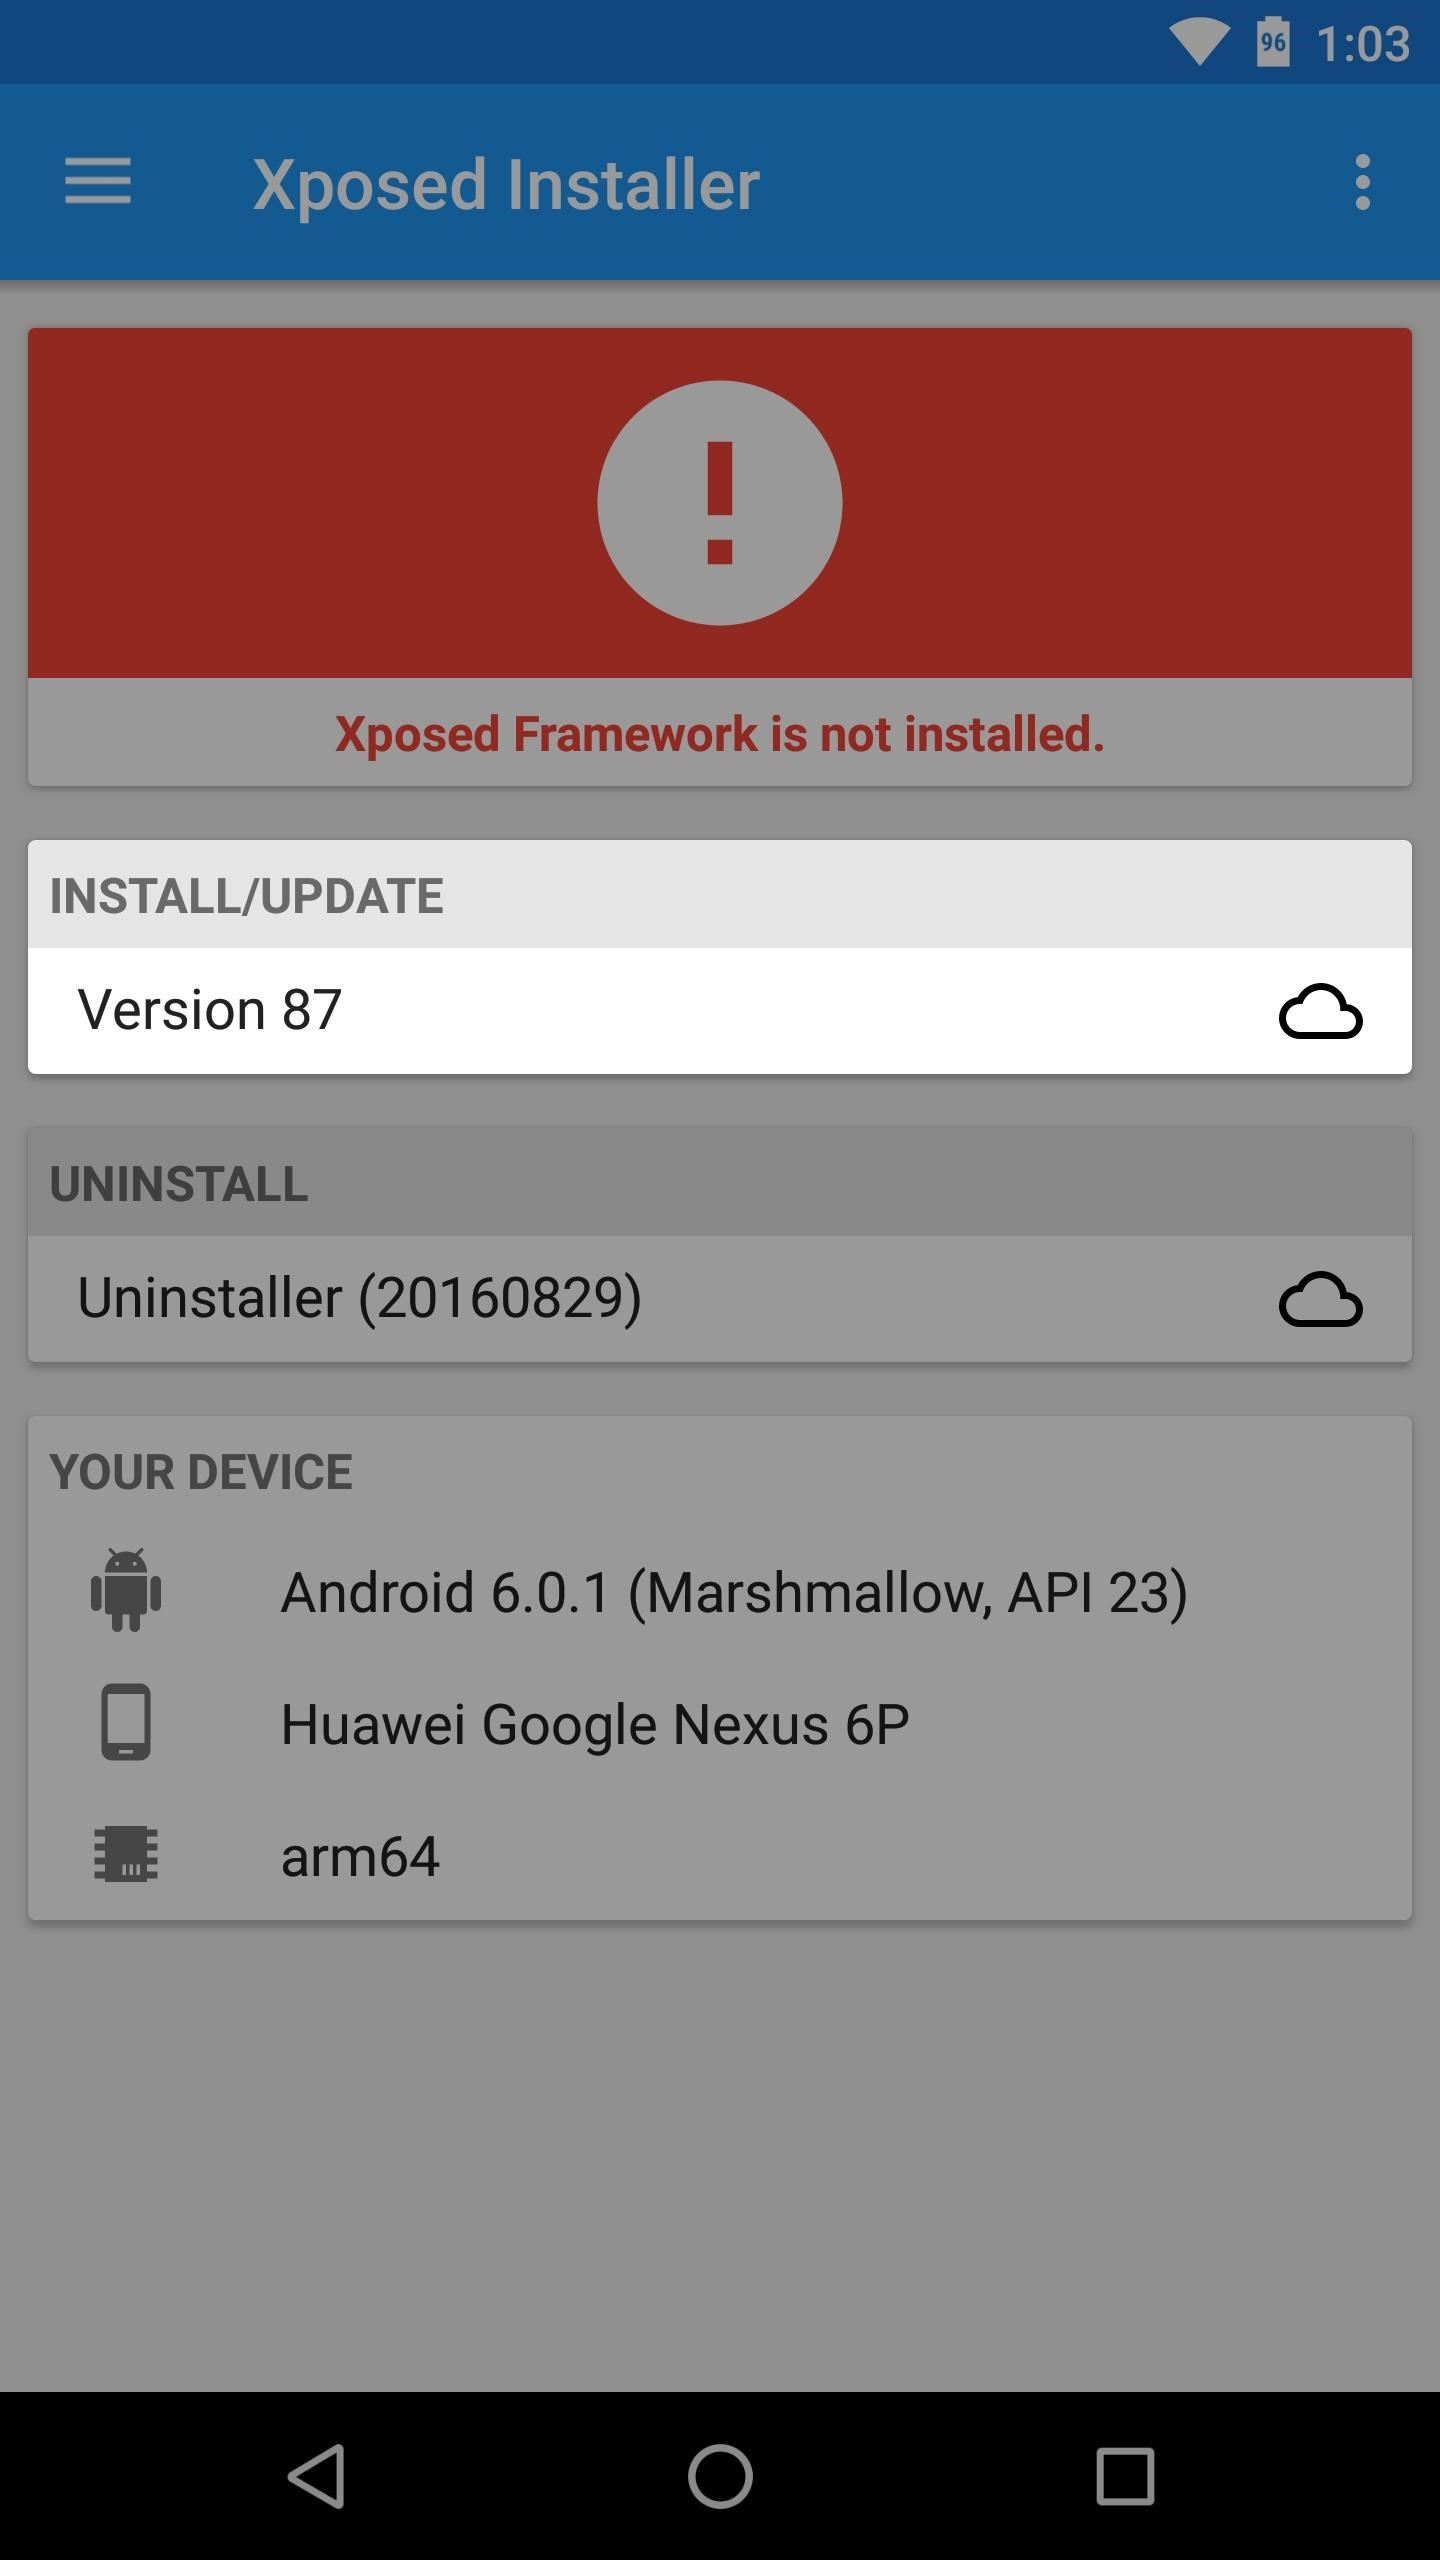 Xposed 101: How to Install the Xposed Framework on Lollipop or Marshmallow